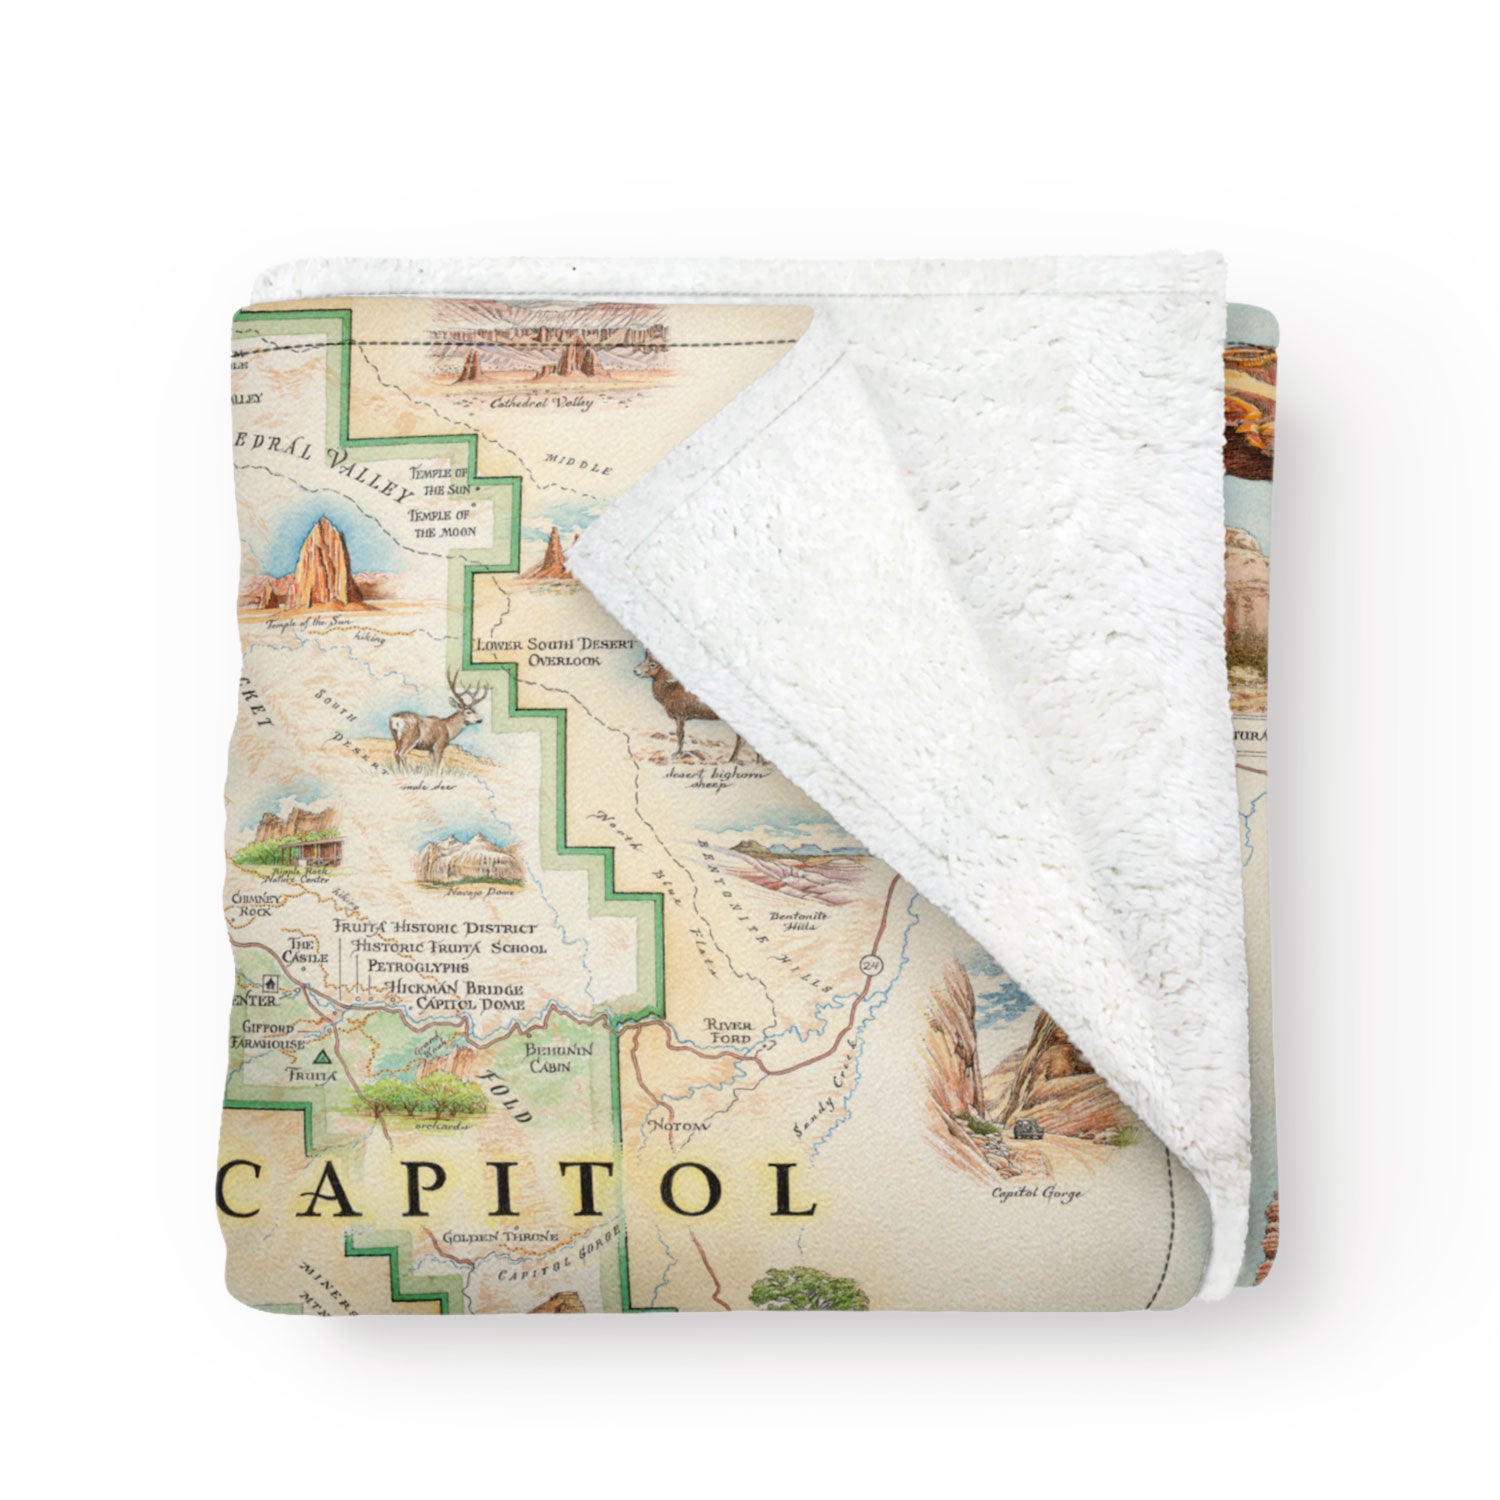 Utah's Capitol Reef National Park Map fleece blanket in earth tones. Featuring Claret Cup Cactus, Narrowleaf Yucca, Prince's Plume, and the Two-Needle Pinyon Pine. Detailed depictions of landmarks and geographic wonders like the Lower Muley Twist Canyon, Capitol Gorge, and Hickman Natural Bridge. Measures 58